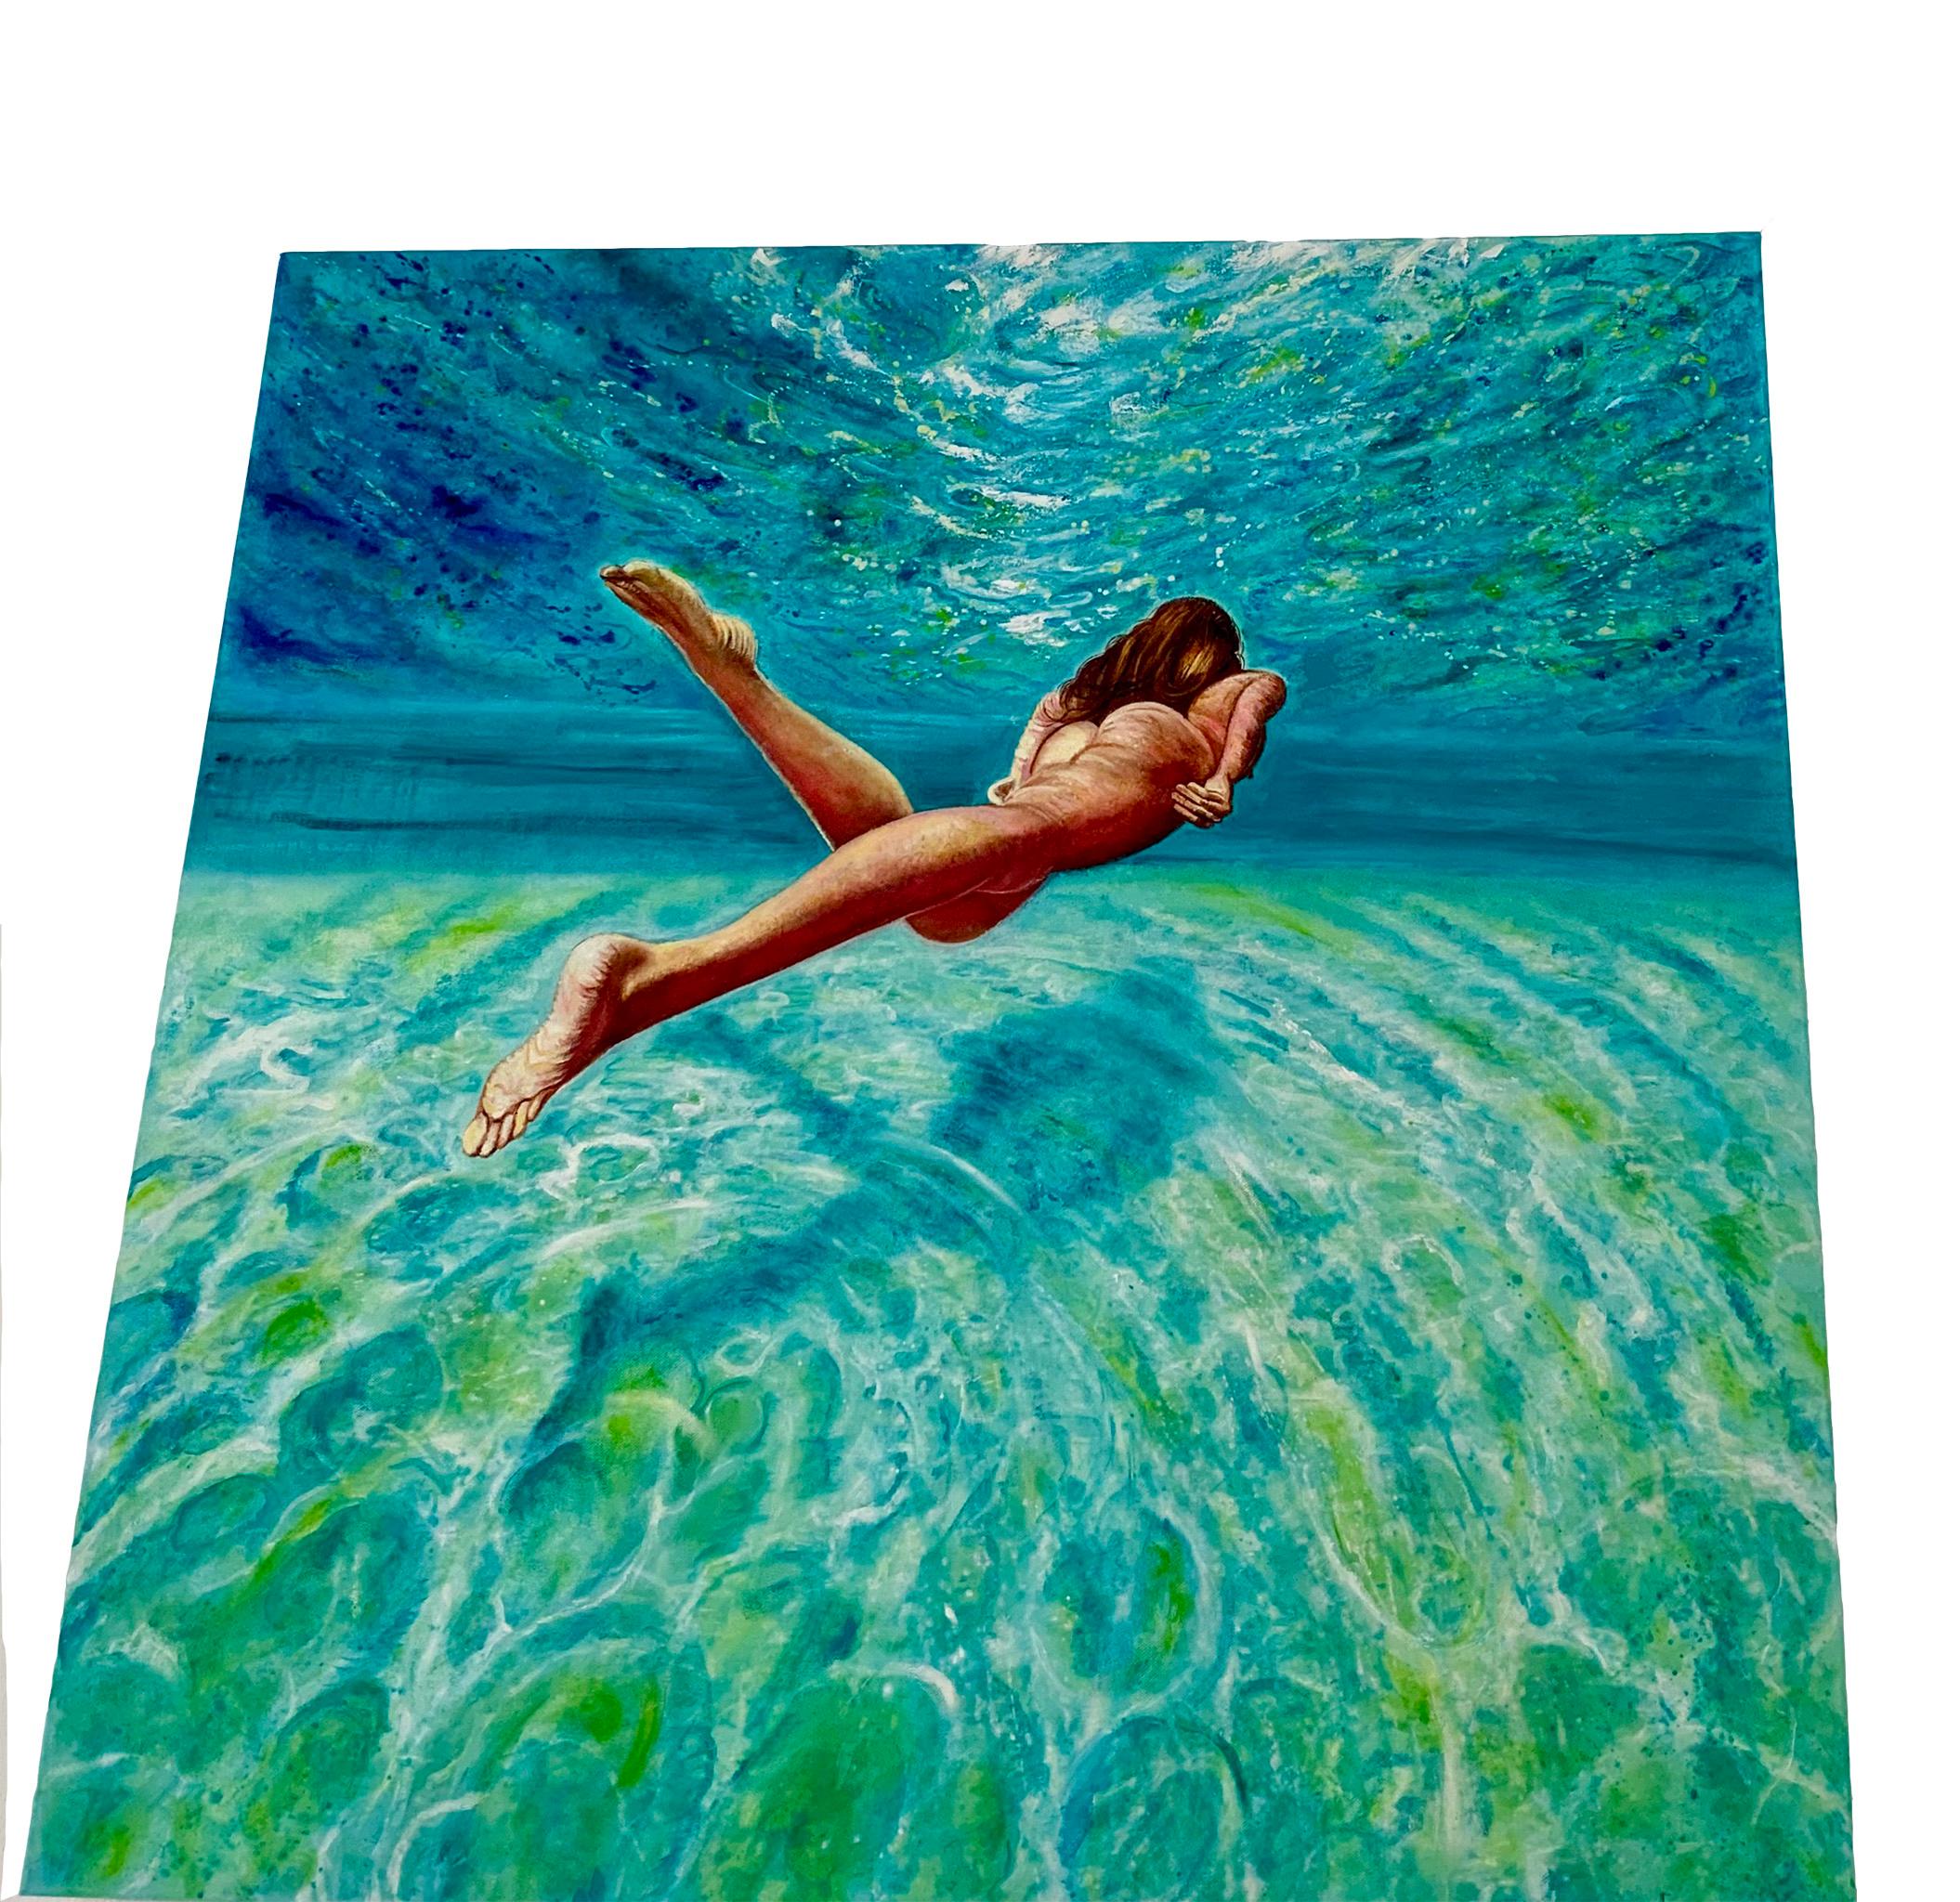 Floating Weightlessly - Oil painting of nude female swimmer, turquoise sea water - Painting by Anastasia Gklava